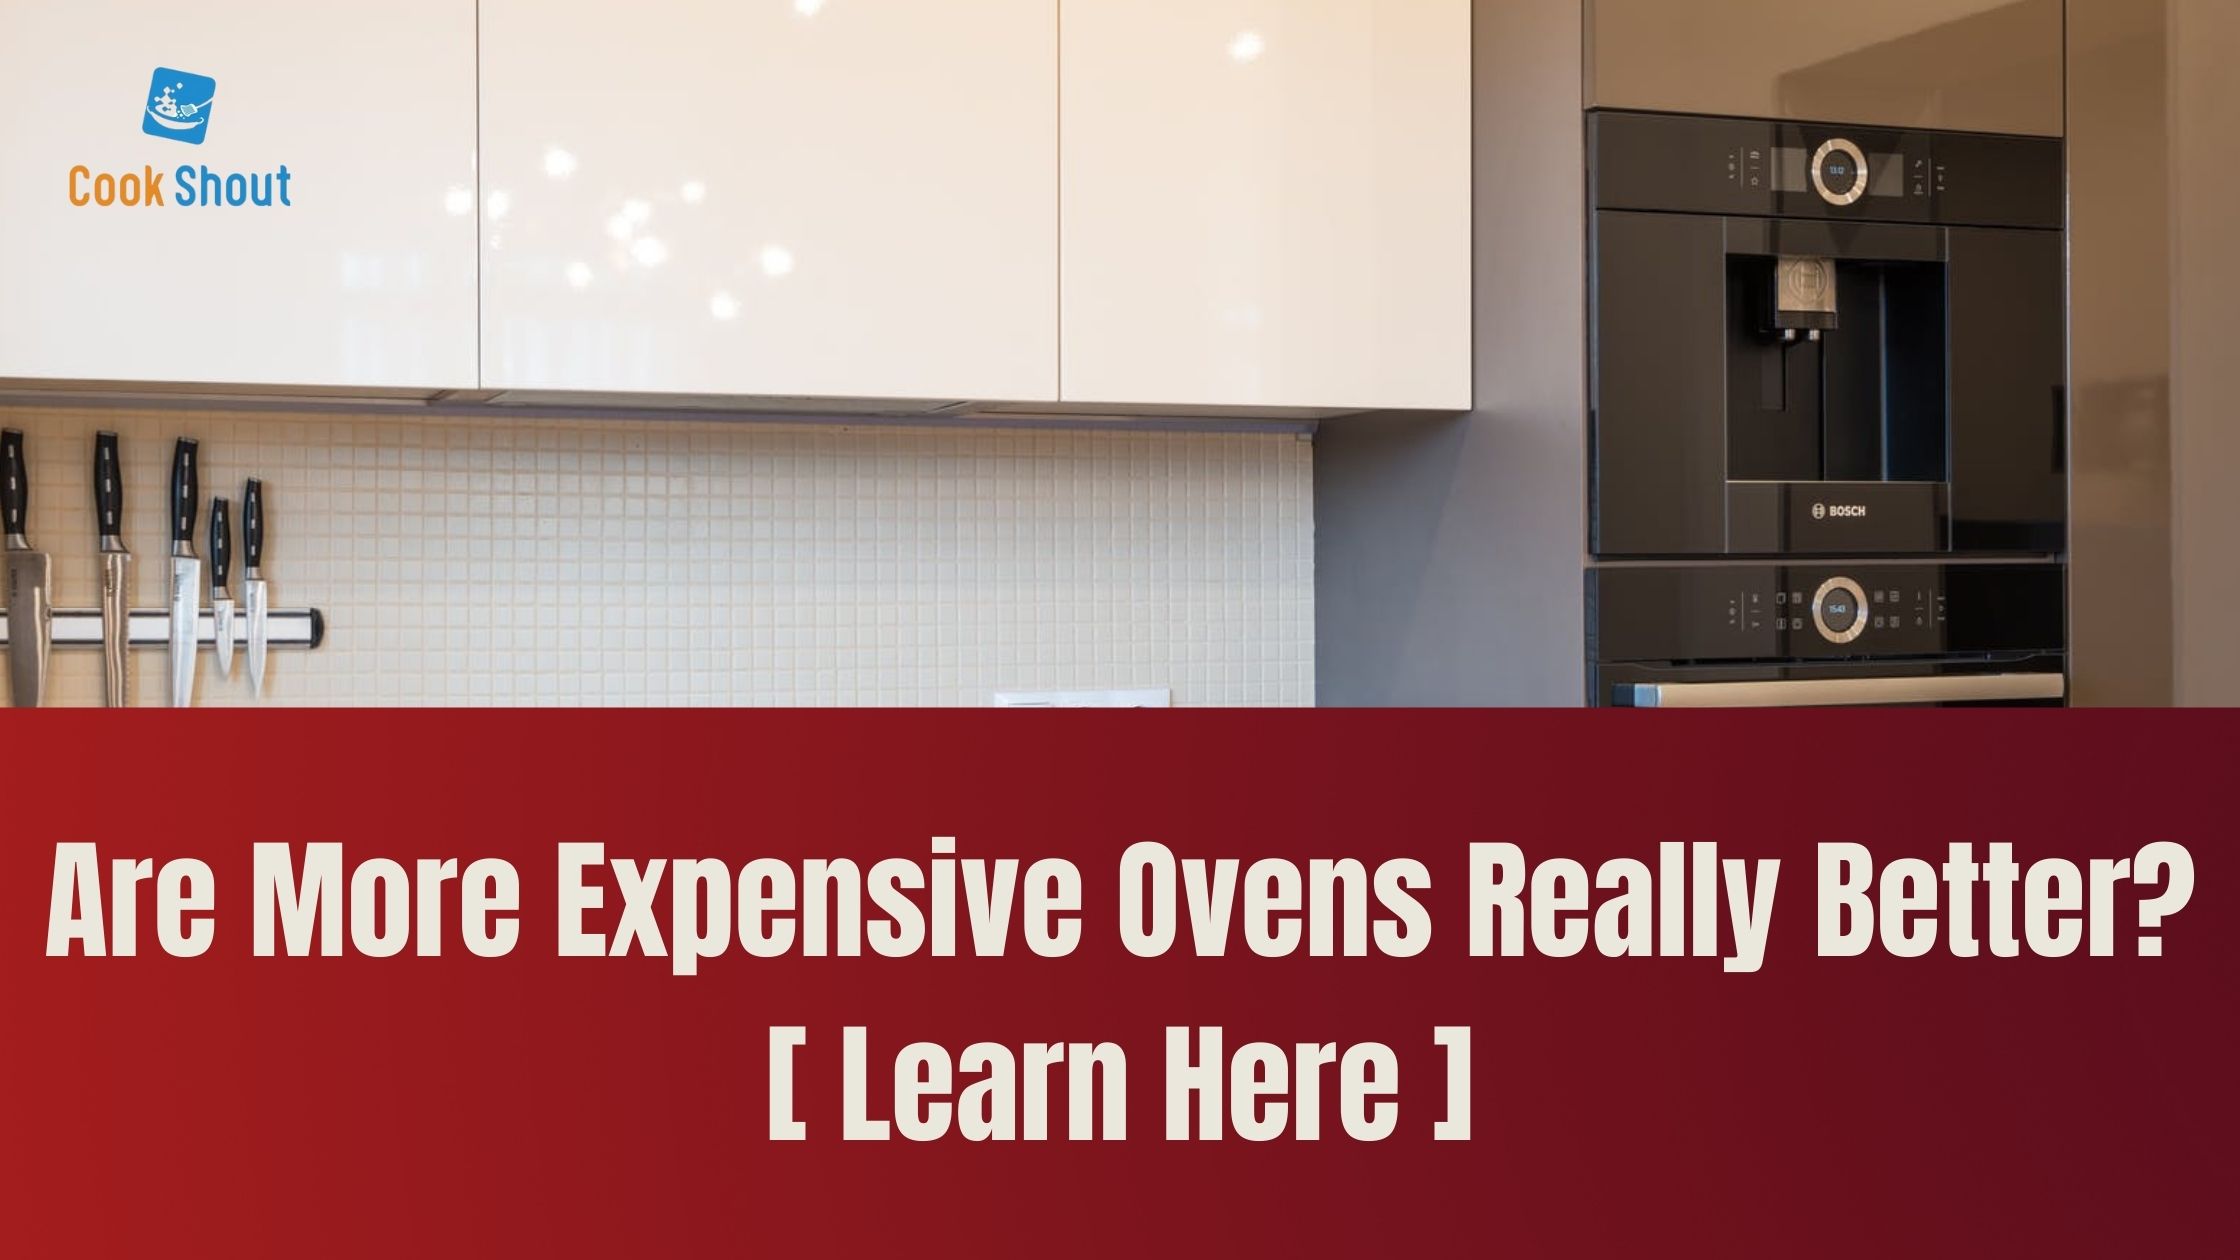 Are More Expensive Ovens Really Better?